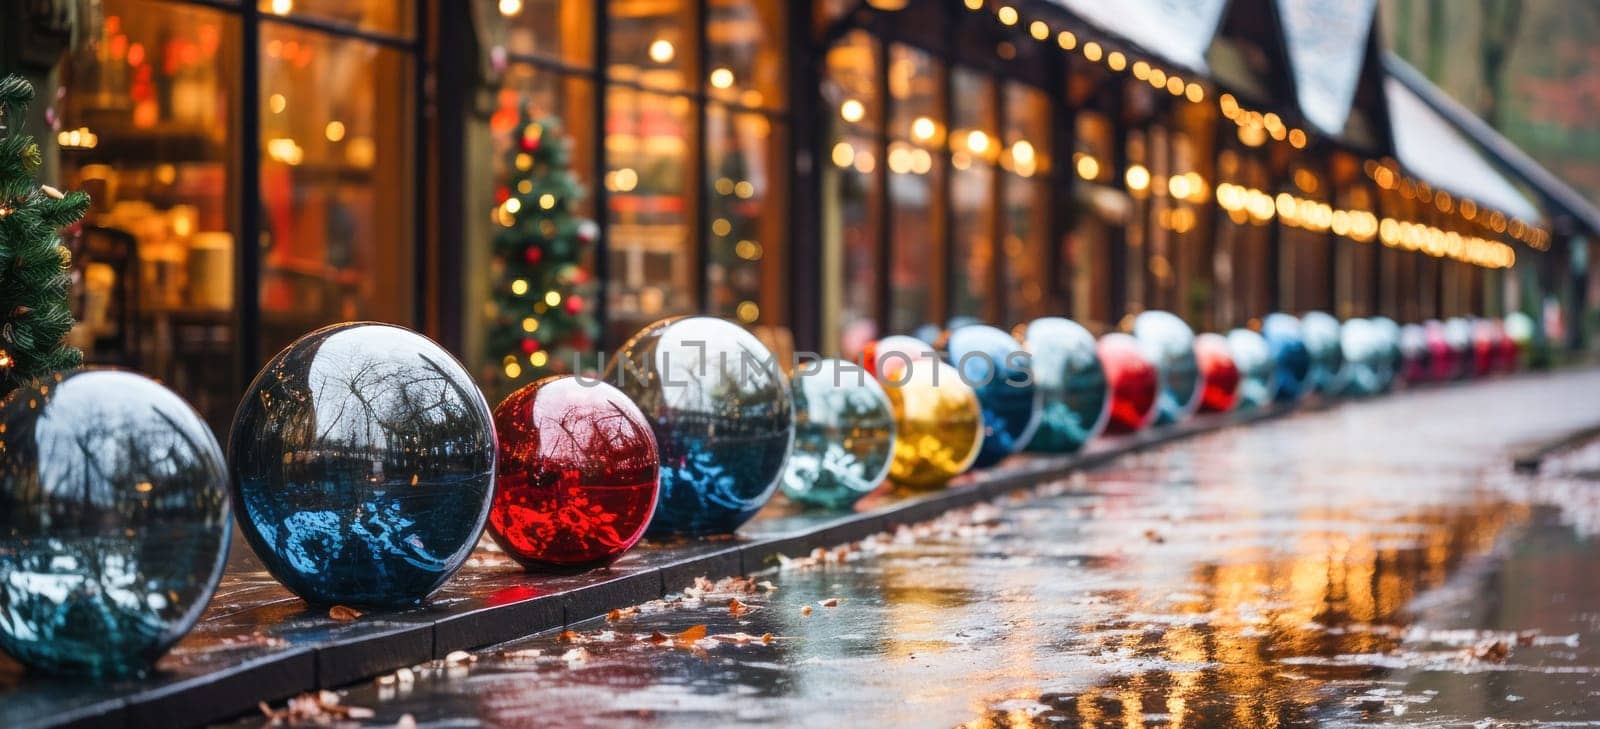 A festive New Year's street decor with sparkling glass baubles adorning the area. The decorations create a spirited and celebratory atmosphere, perfect for the holiday season.